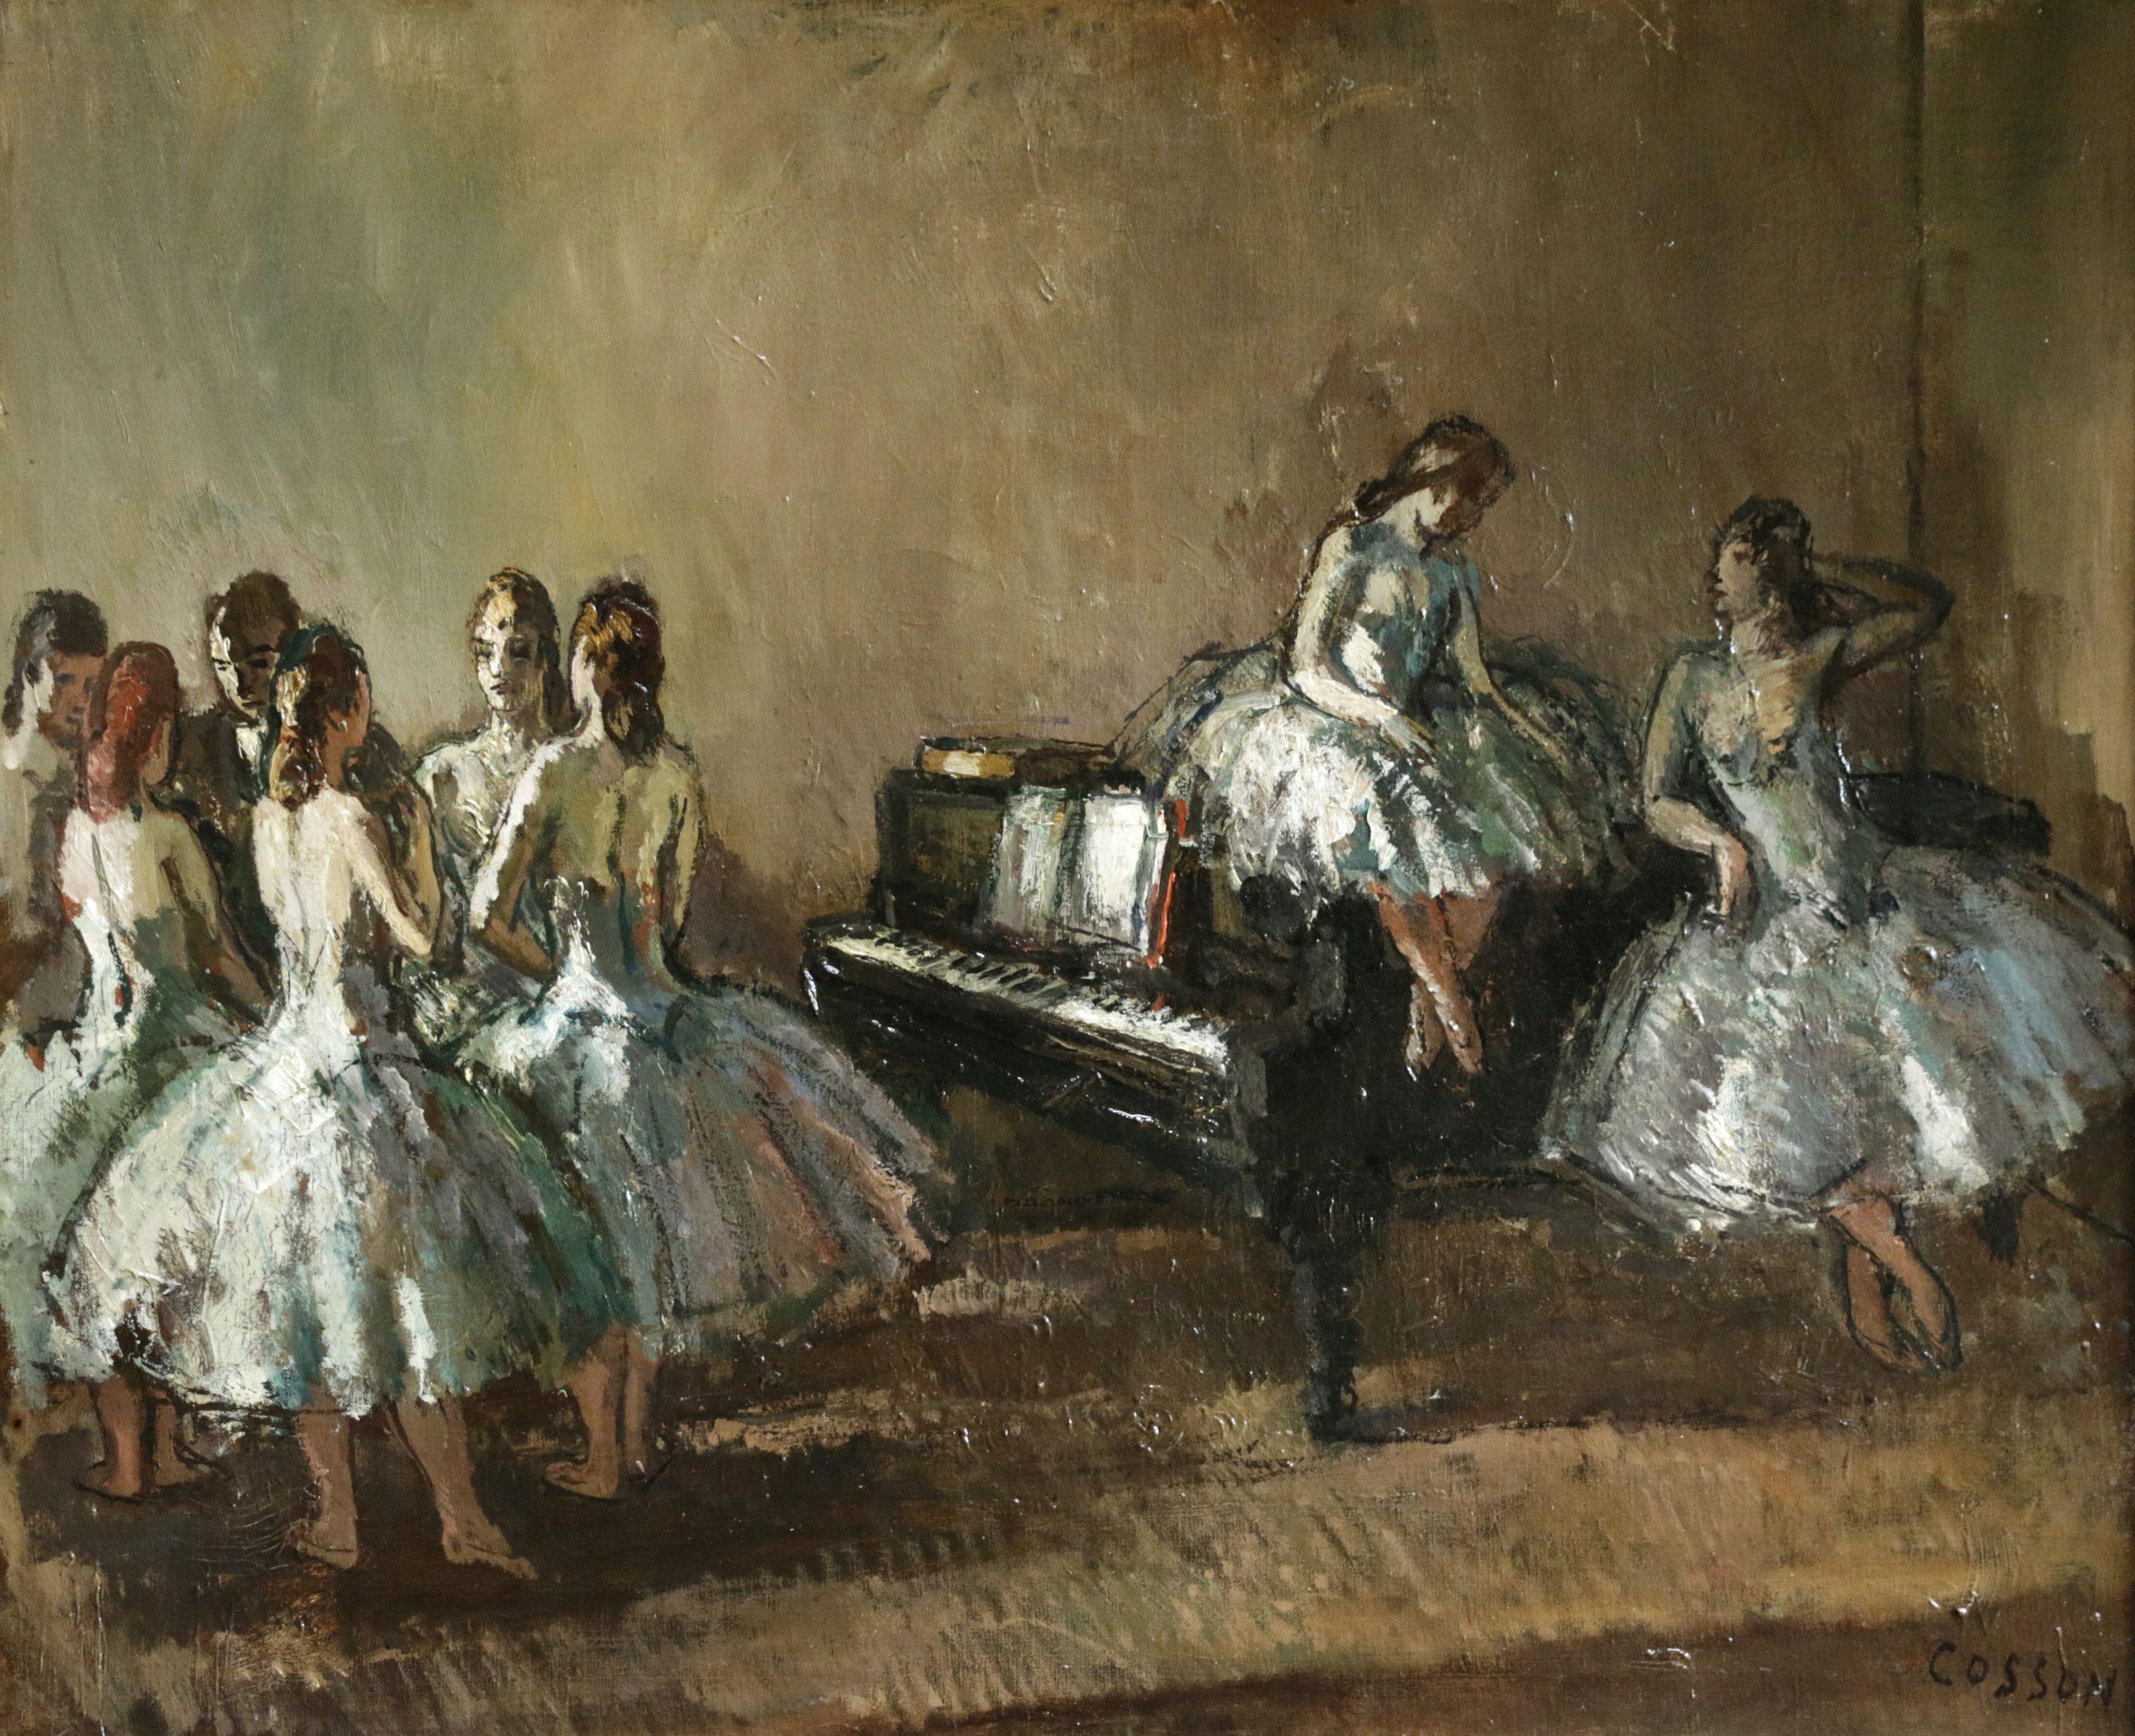 Jean-Louis-Marcel Cosson Figurative Painting - "Les Danseurs" Cosson French Impressionist Ballerinas and Piano in Interior